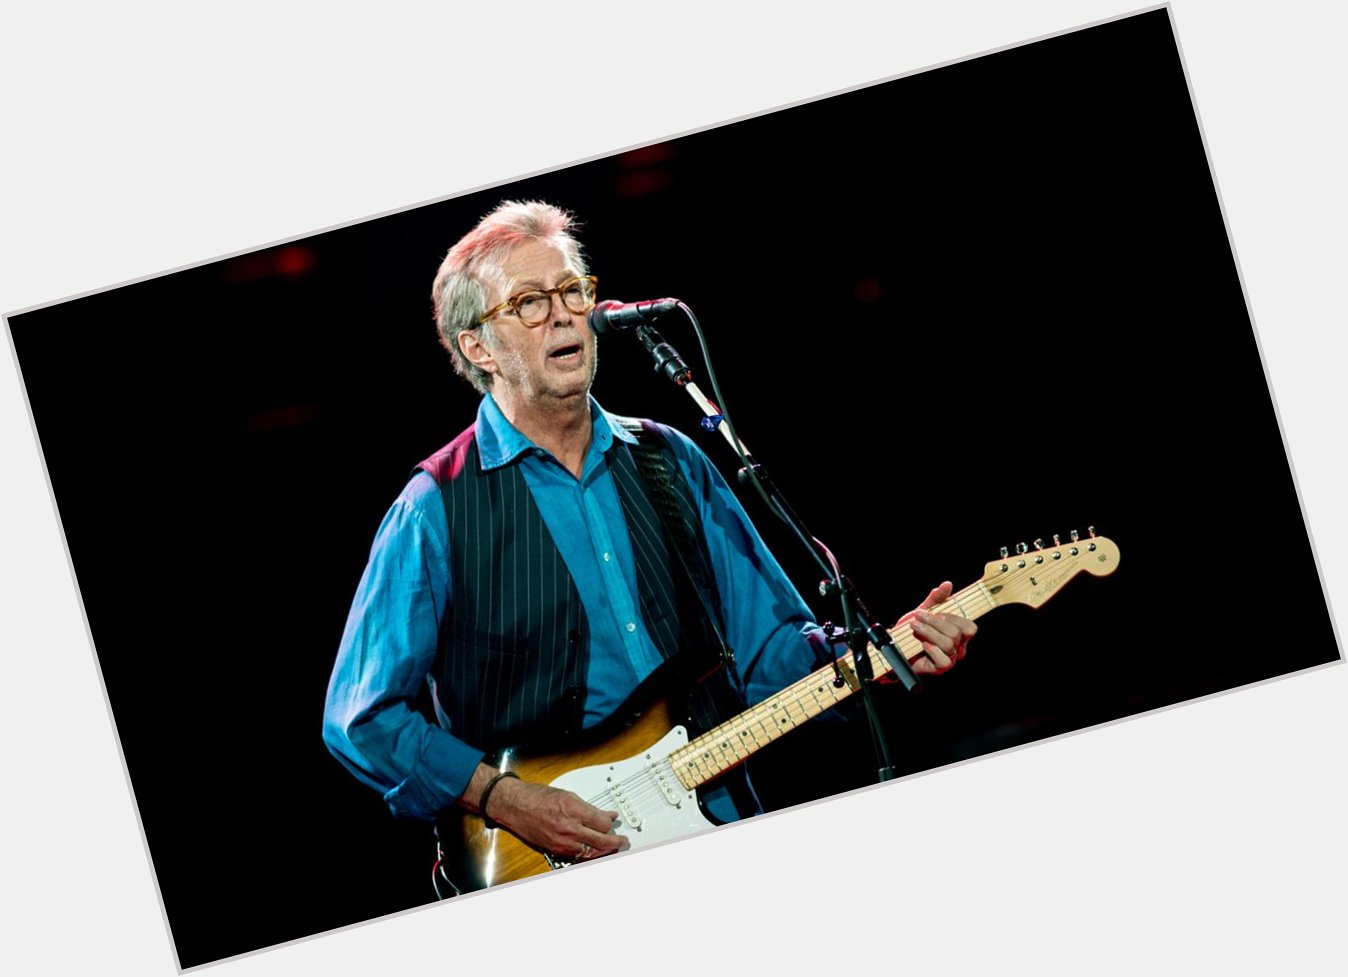 Happy 76th birthday to the one and only Eric Clapton! 